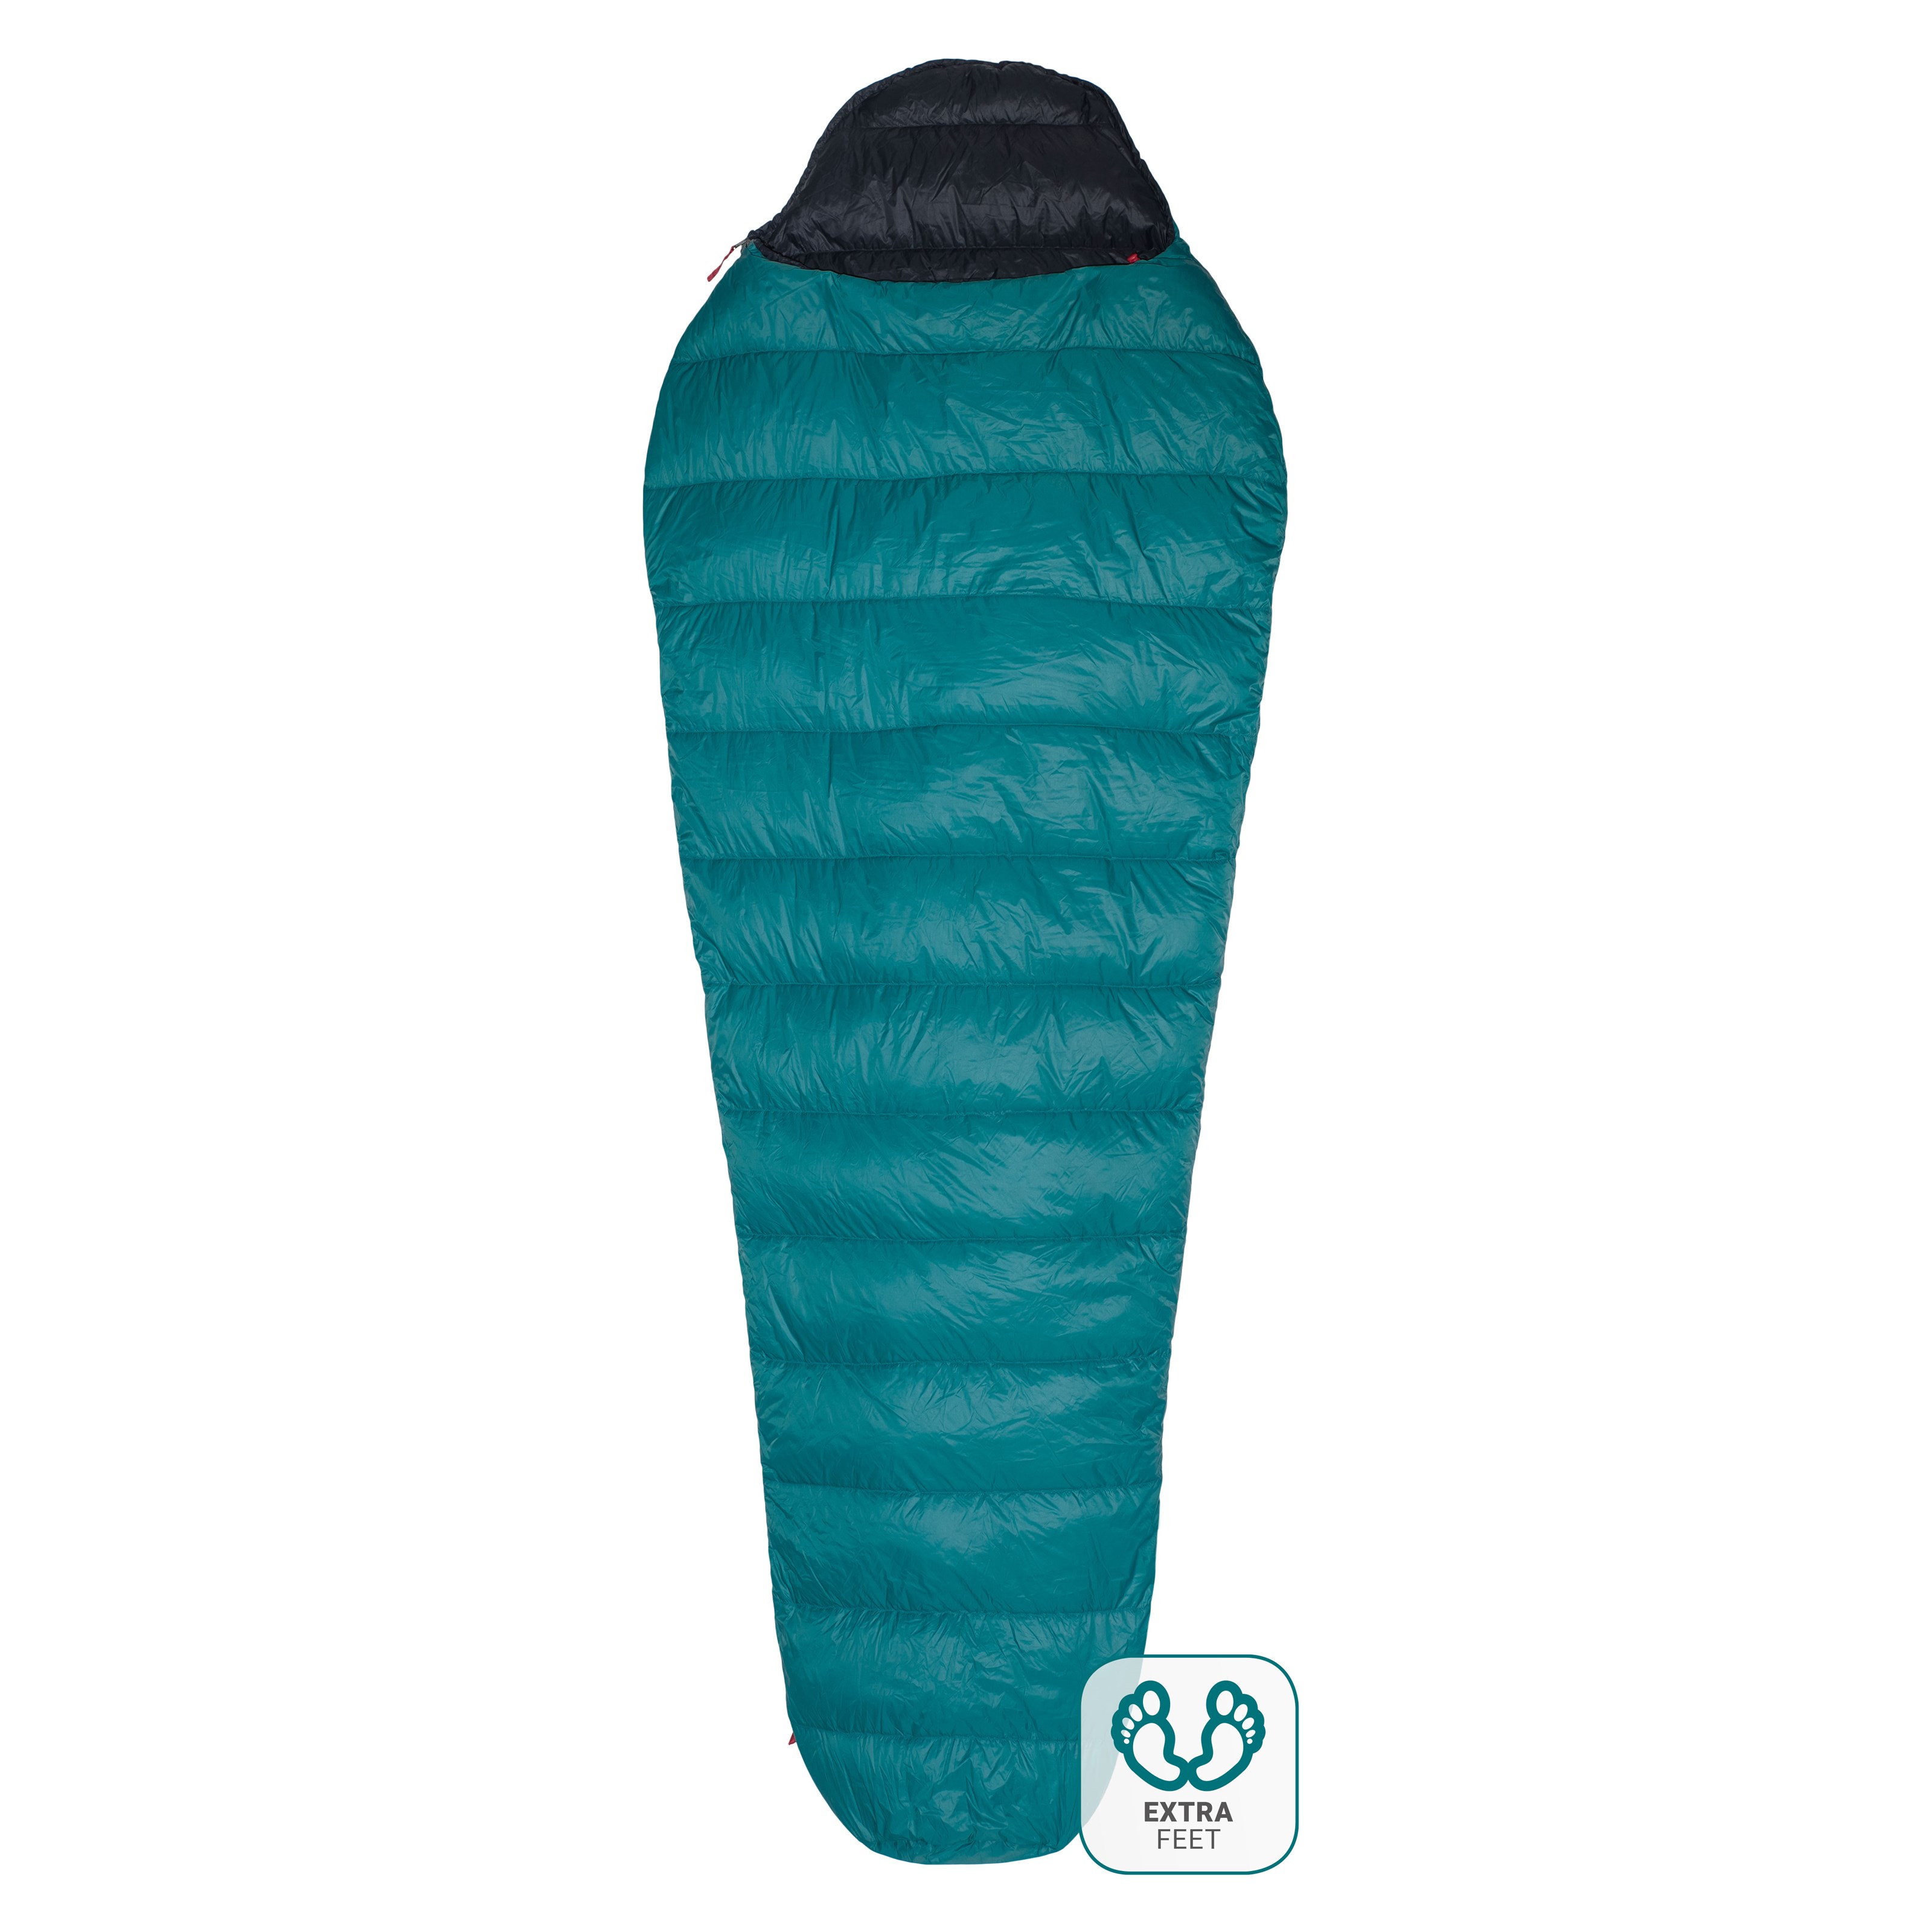 SPACÁK SOLITAIRE  250 EXTRA FEET teal green/black  613970 L-11